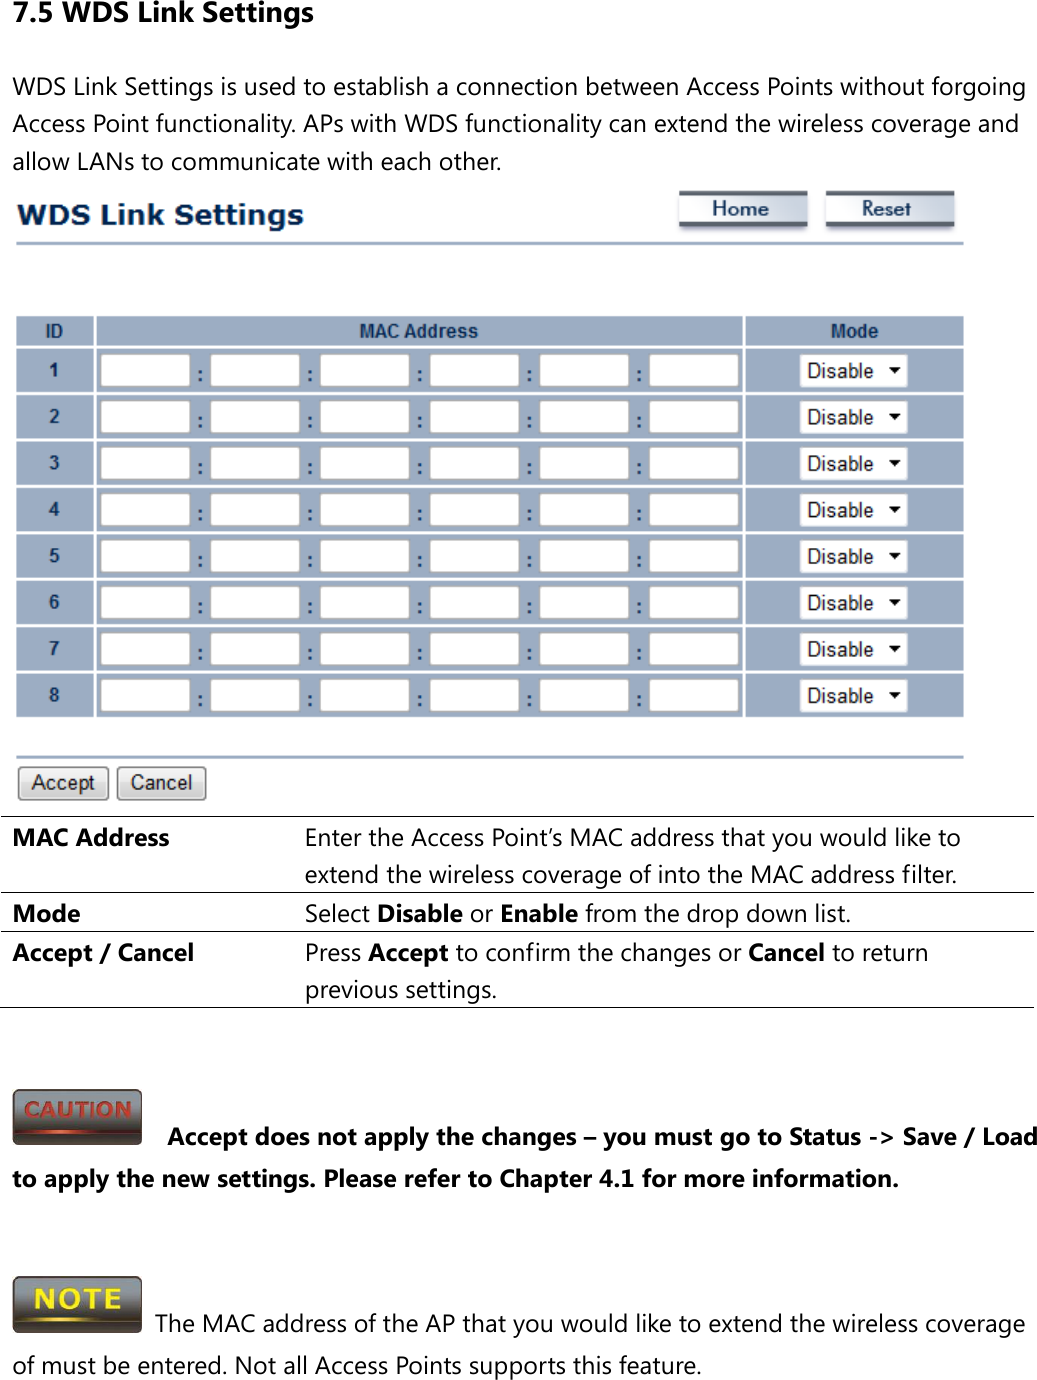 7.5 WDS Link Settings WDS Link Settings is used to establish a connection between Access Points without forgoing Access Point functionality. APs with WDS functionality can extend the wireless coverage and allow LANs to communicate with each other.  MAC Address Enter the Access Point’s MAC address that you would like to extend the wireless coverage of into the MAC address filter. Mode Select Disable or Enable from the drop down list. Accept / Cancel Press Accept to confirm the changes or Cancel to return previous settings.     Accept does not apply the changes – you must go to Status -&gt; Save / Load to apply the new settings. Please refer to Chapter 4.1 for more information.    The MAC address of the AP that you would like to extend the wireless coverage of must be entered. Not all Access Points supports this feature.  